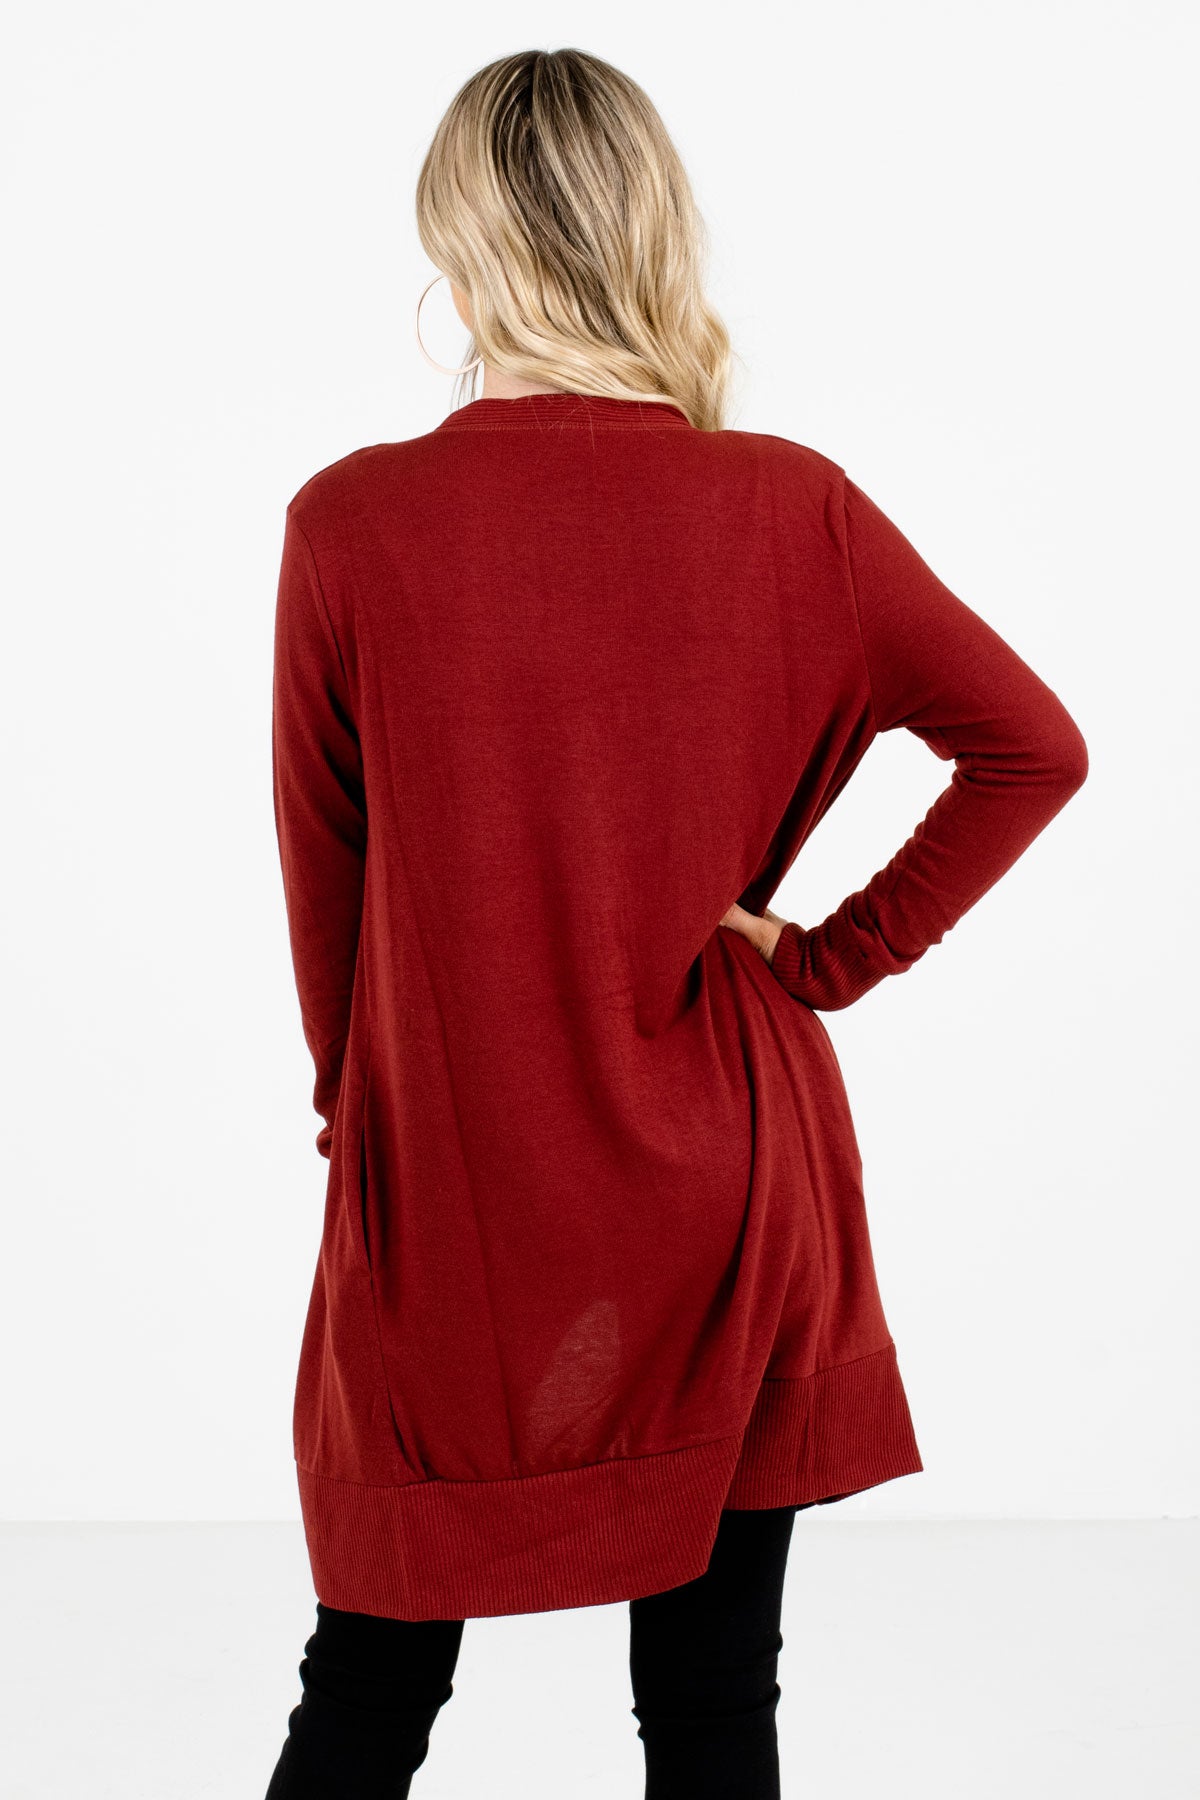 Women's Rust Red High-Quality Boutique Cardigan